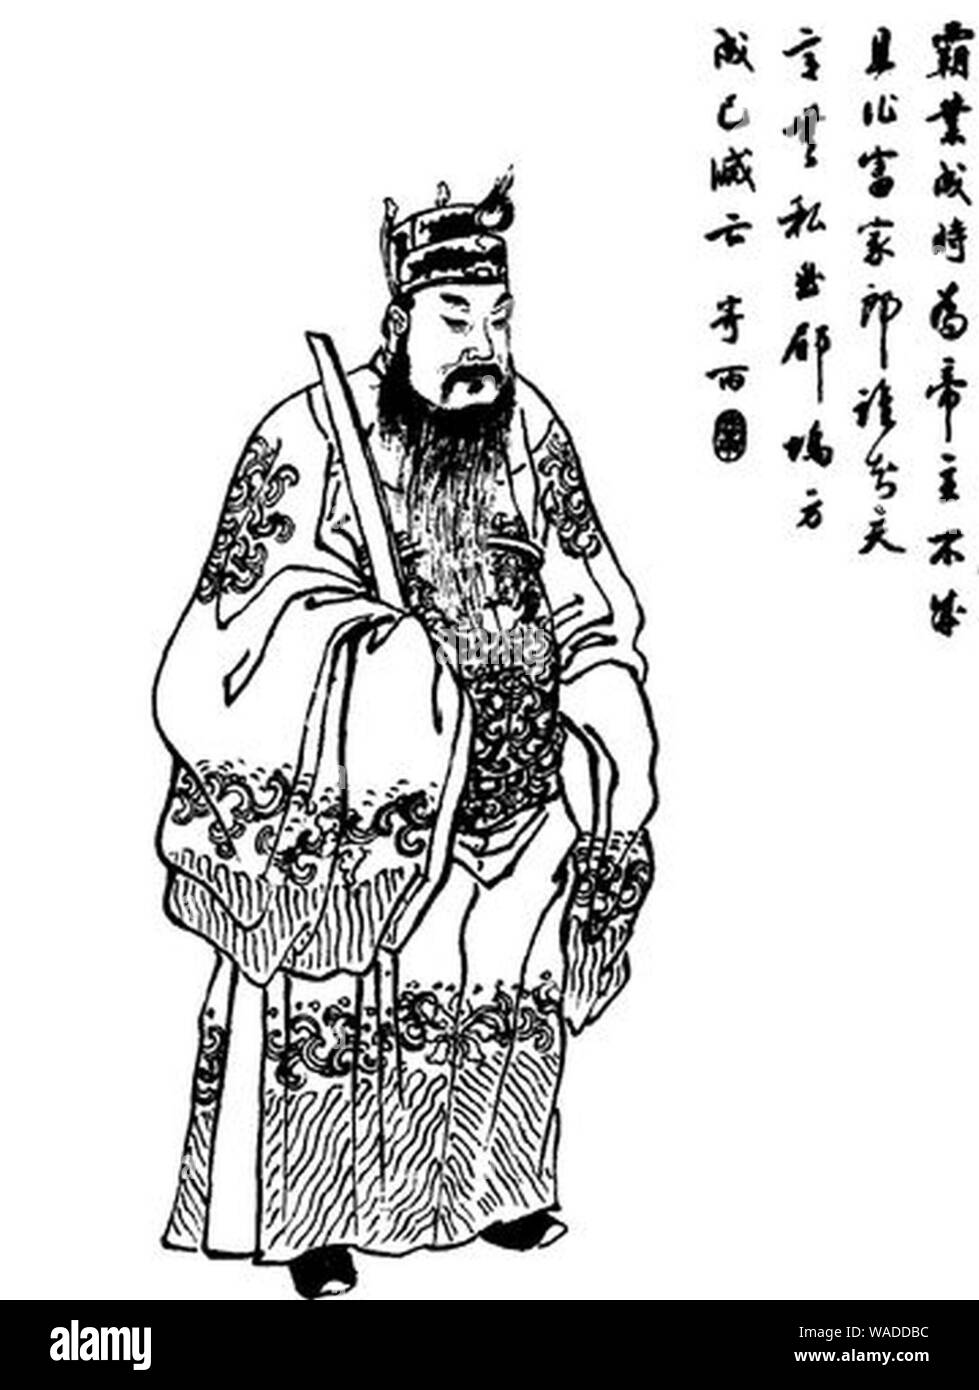 Dong Zhuo Qing Dynasty Illustration. Stock Photo